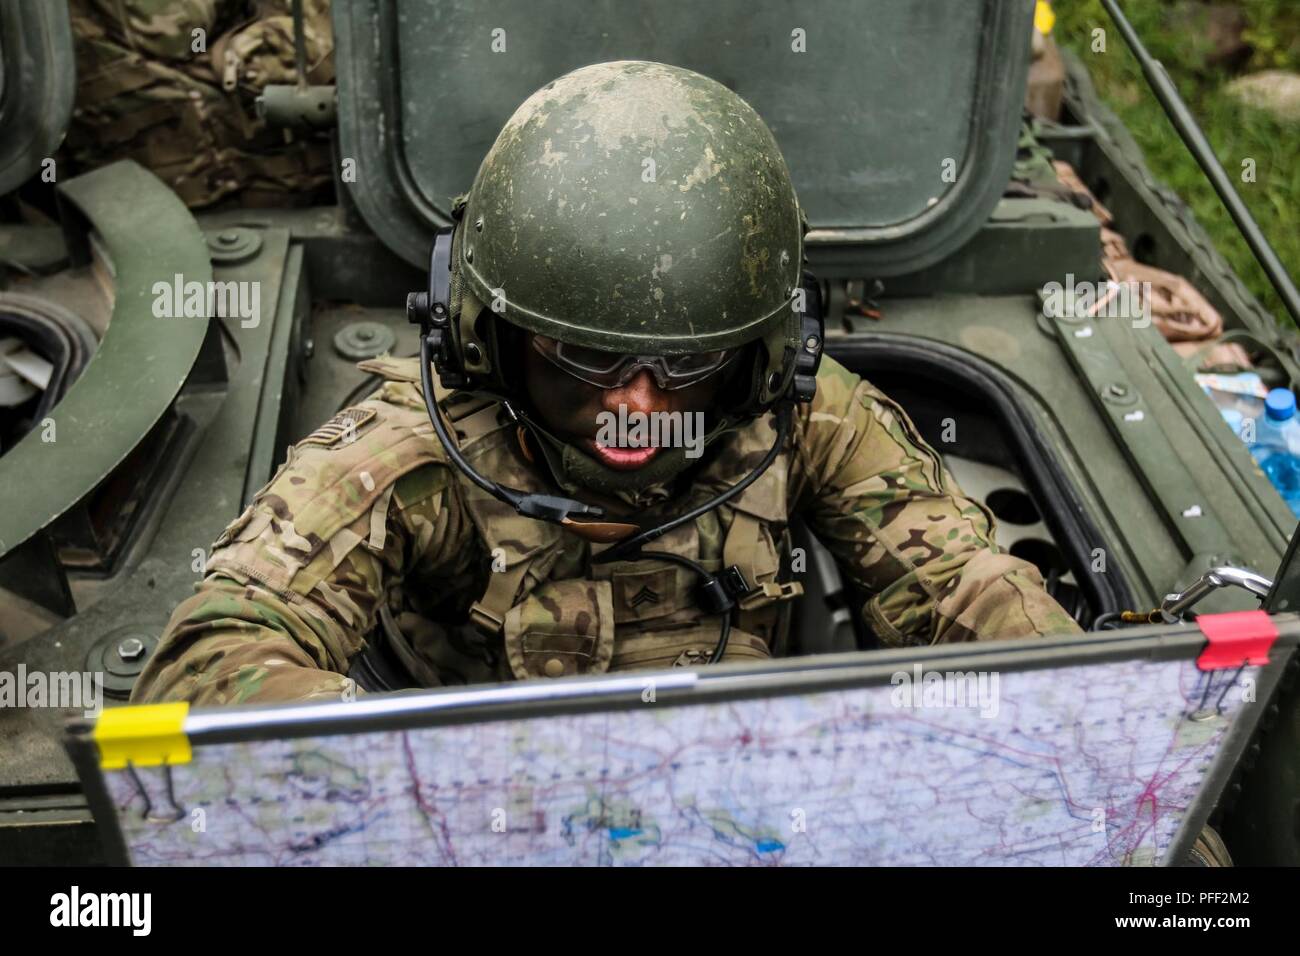 Sgt. Dellon Tobin, Brooklyn, New York native, infantryman with 1st Squadron, 2nd Cavalry Regiment, organizes a troop movement during exercise Puma 2 with Battle Group Poland at Bemowo Piskie Training Area, Poland on June 13, 2018 in the midst of Saber Strike 18. This year's exercise, which runs from June 3-15, tests allies and partners from 19 countries on their ability work together to deter aggression in the region and improve each unit's ability to perform their designated mission. Stock Photo